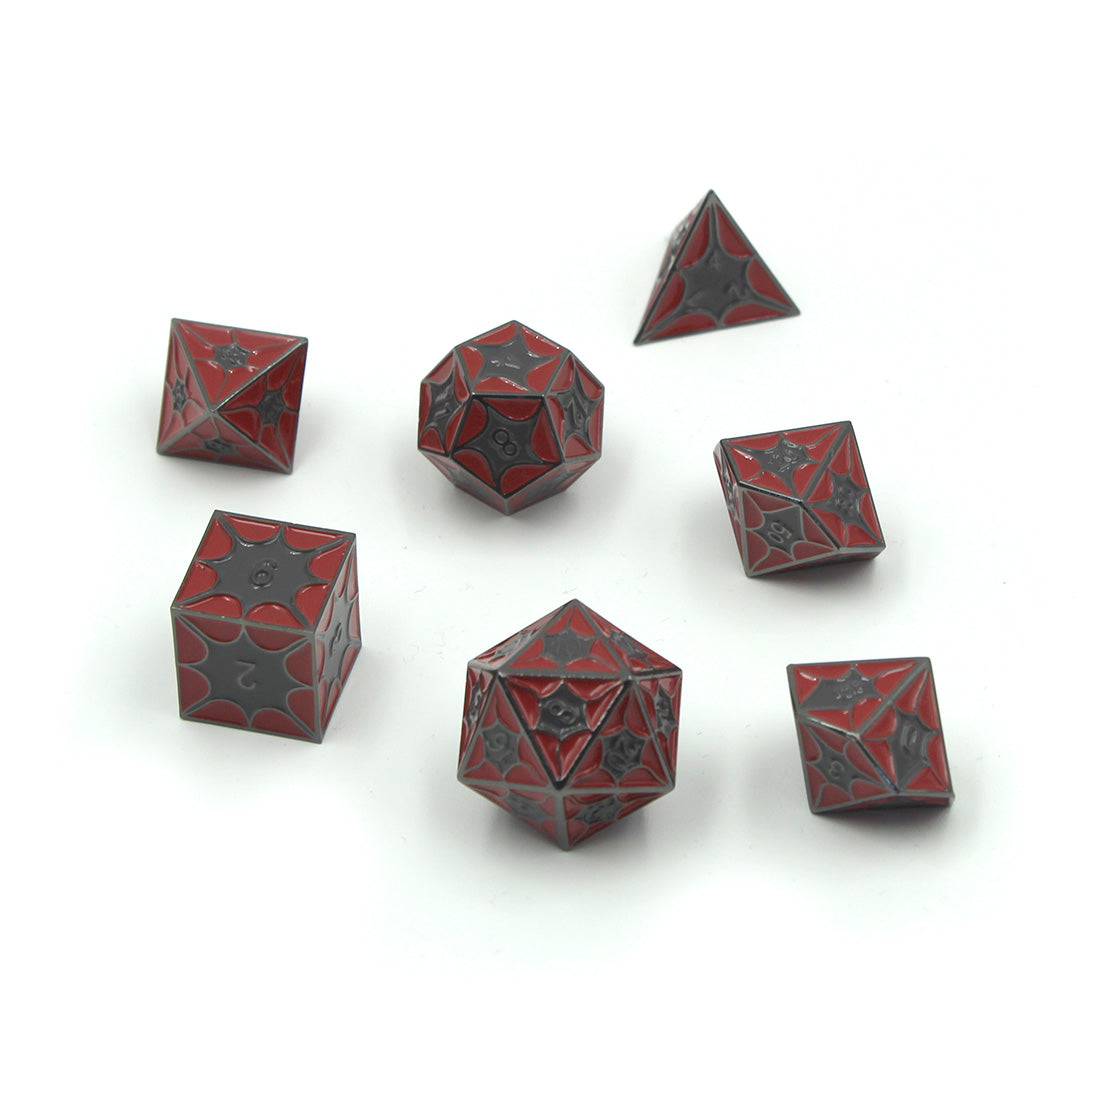 Red dragon inspired dice set